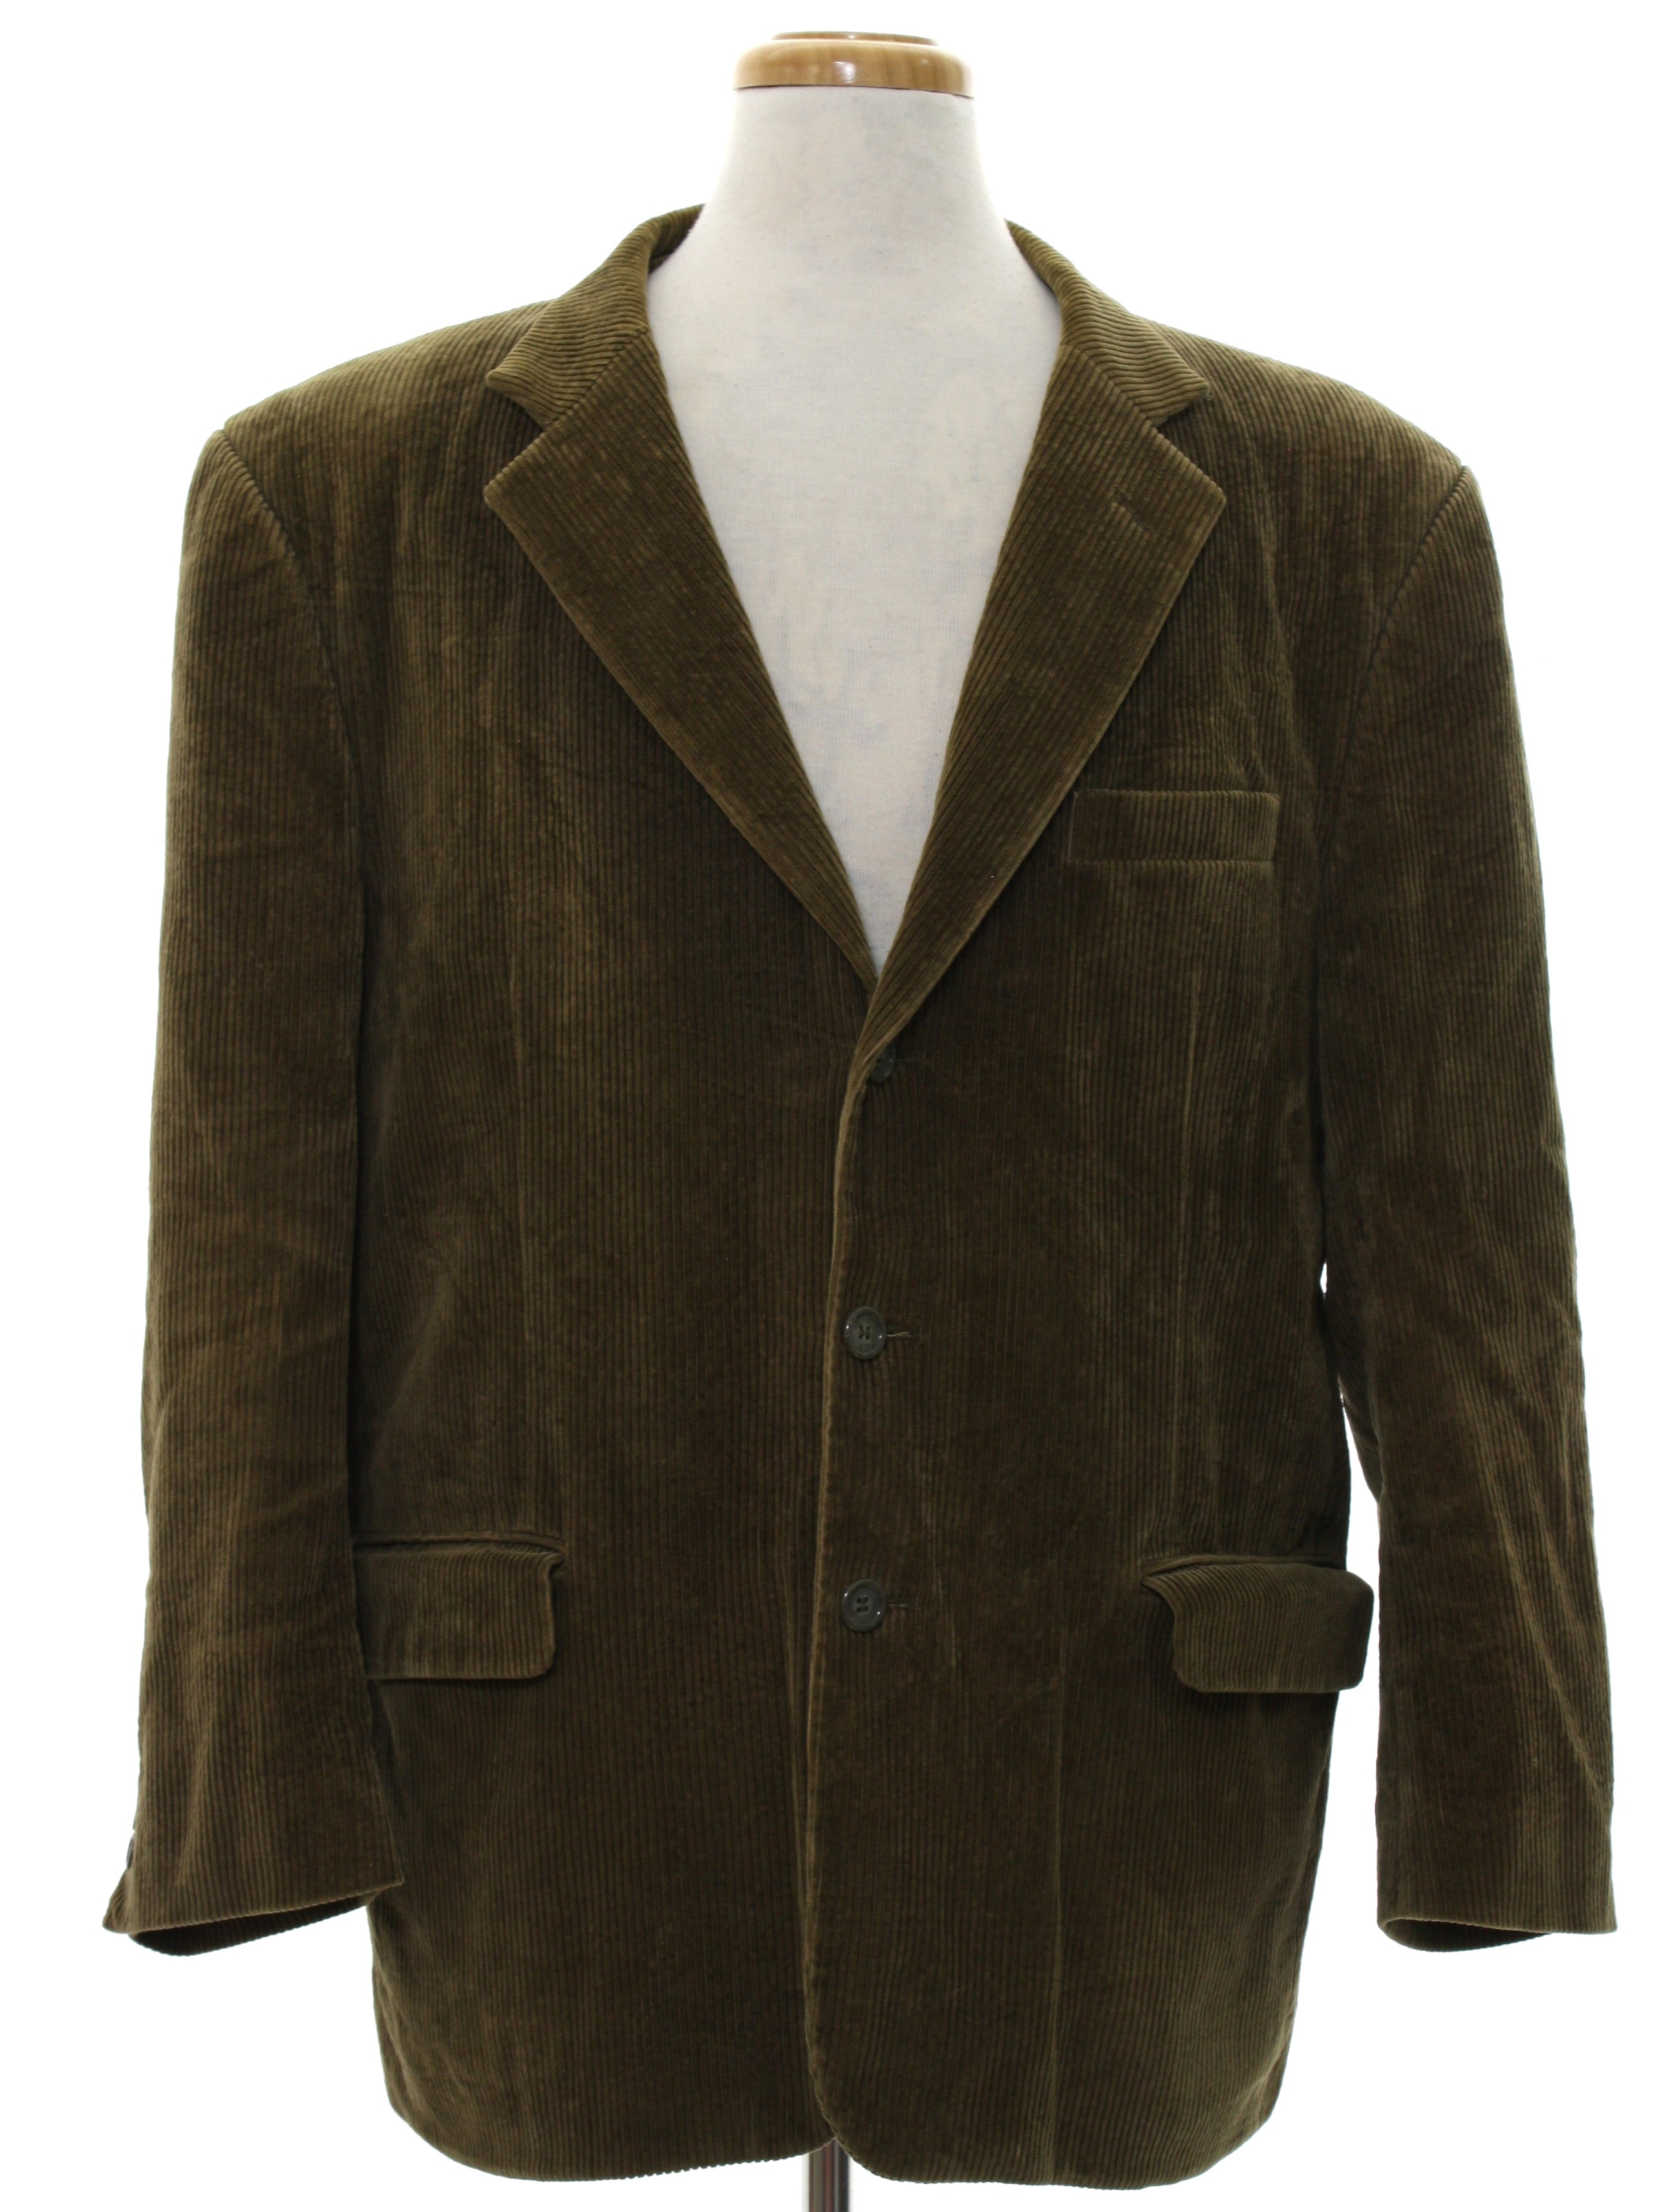 1980s Norm Thompson Jacket: Late 80s or Early 90s -Norm Thompson- Mens ...